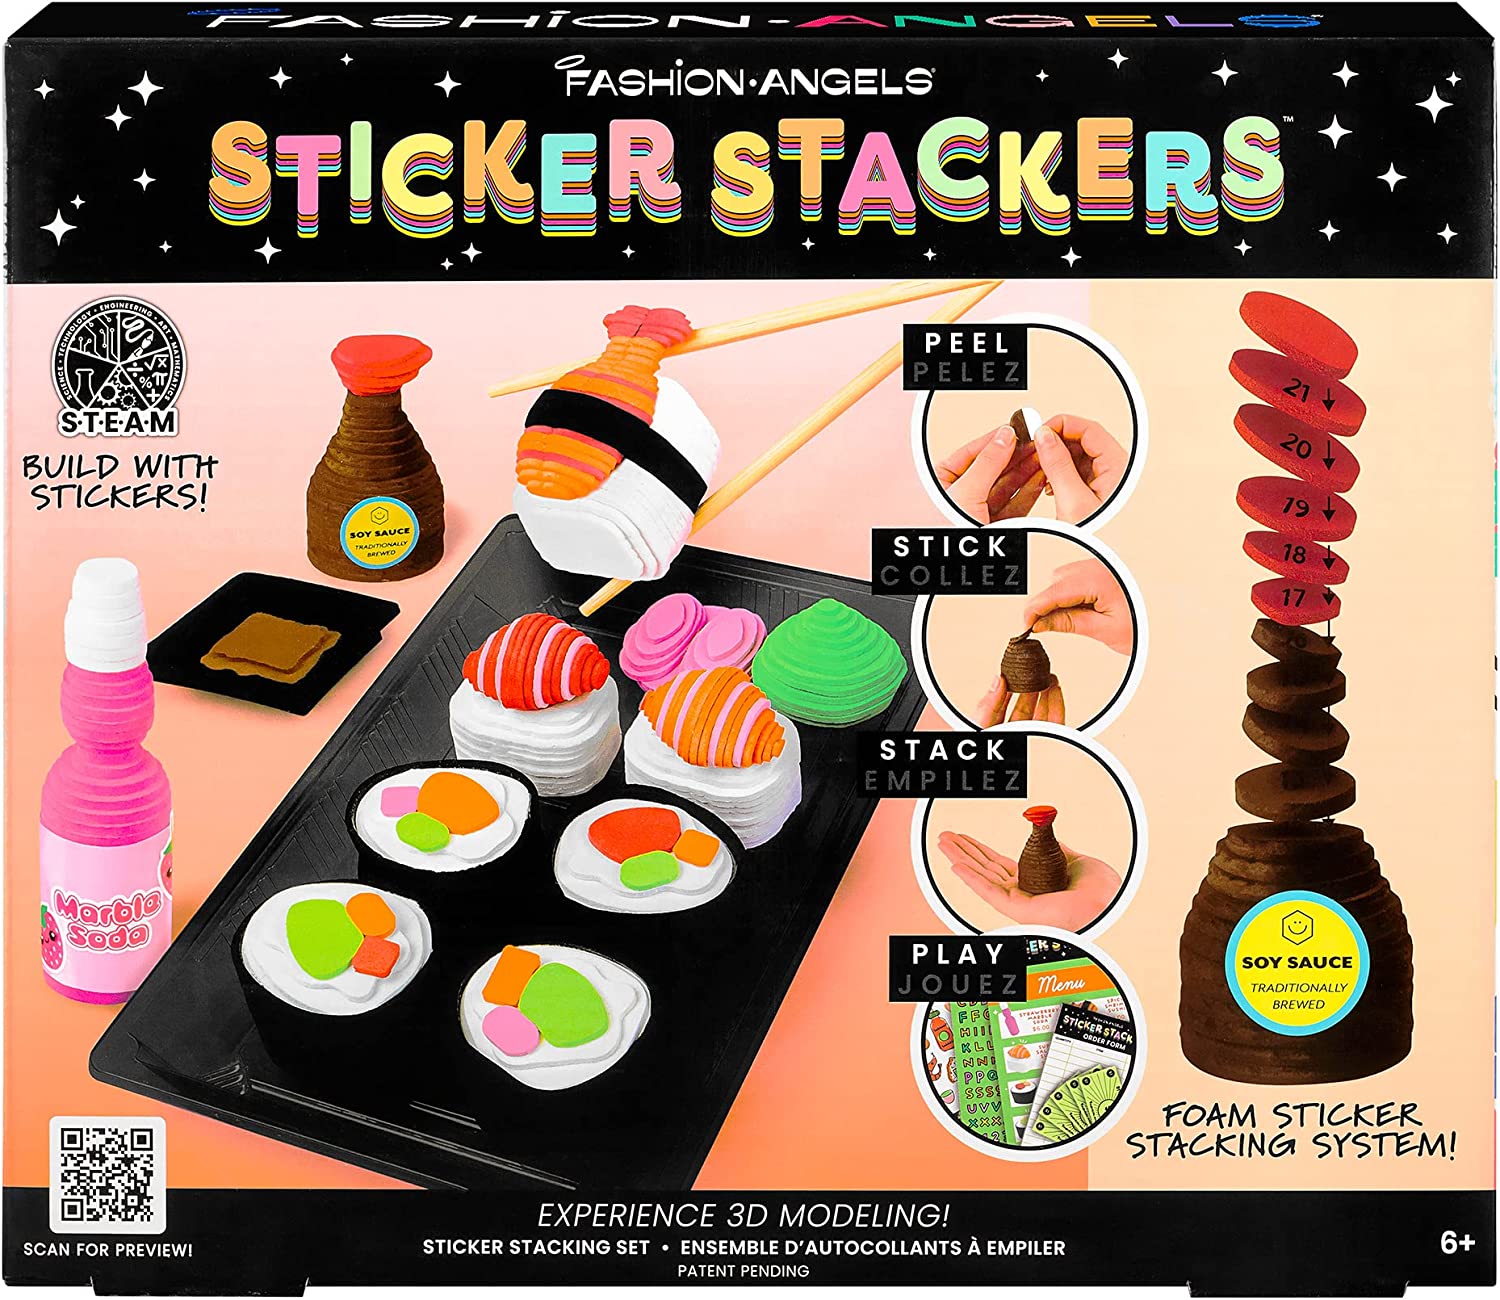 5-Fashion Angels’ Sushi Sticker Stackers